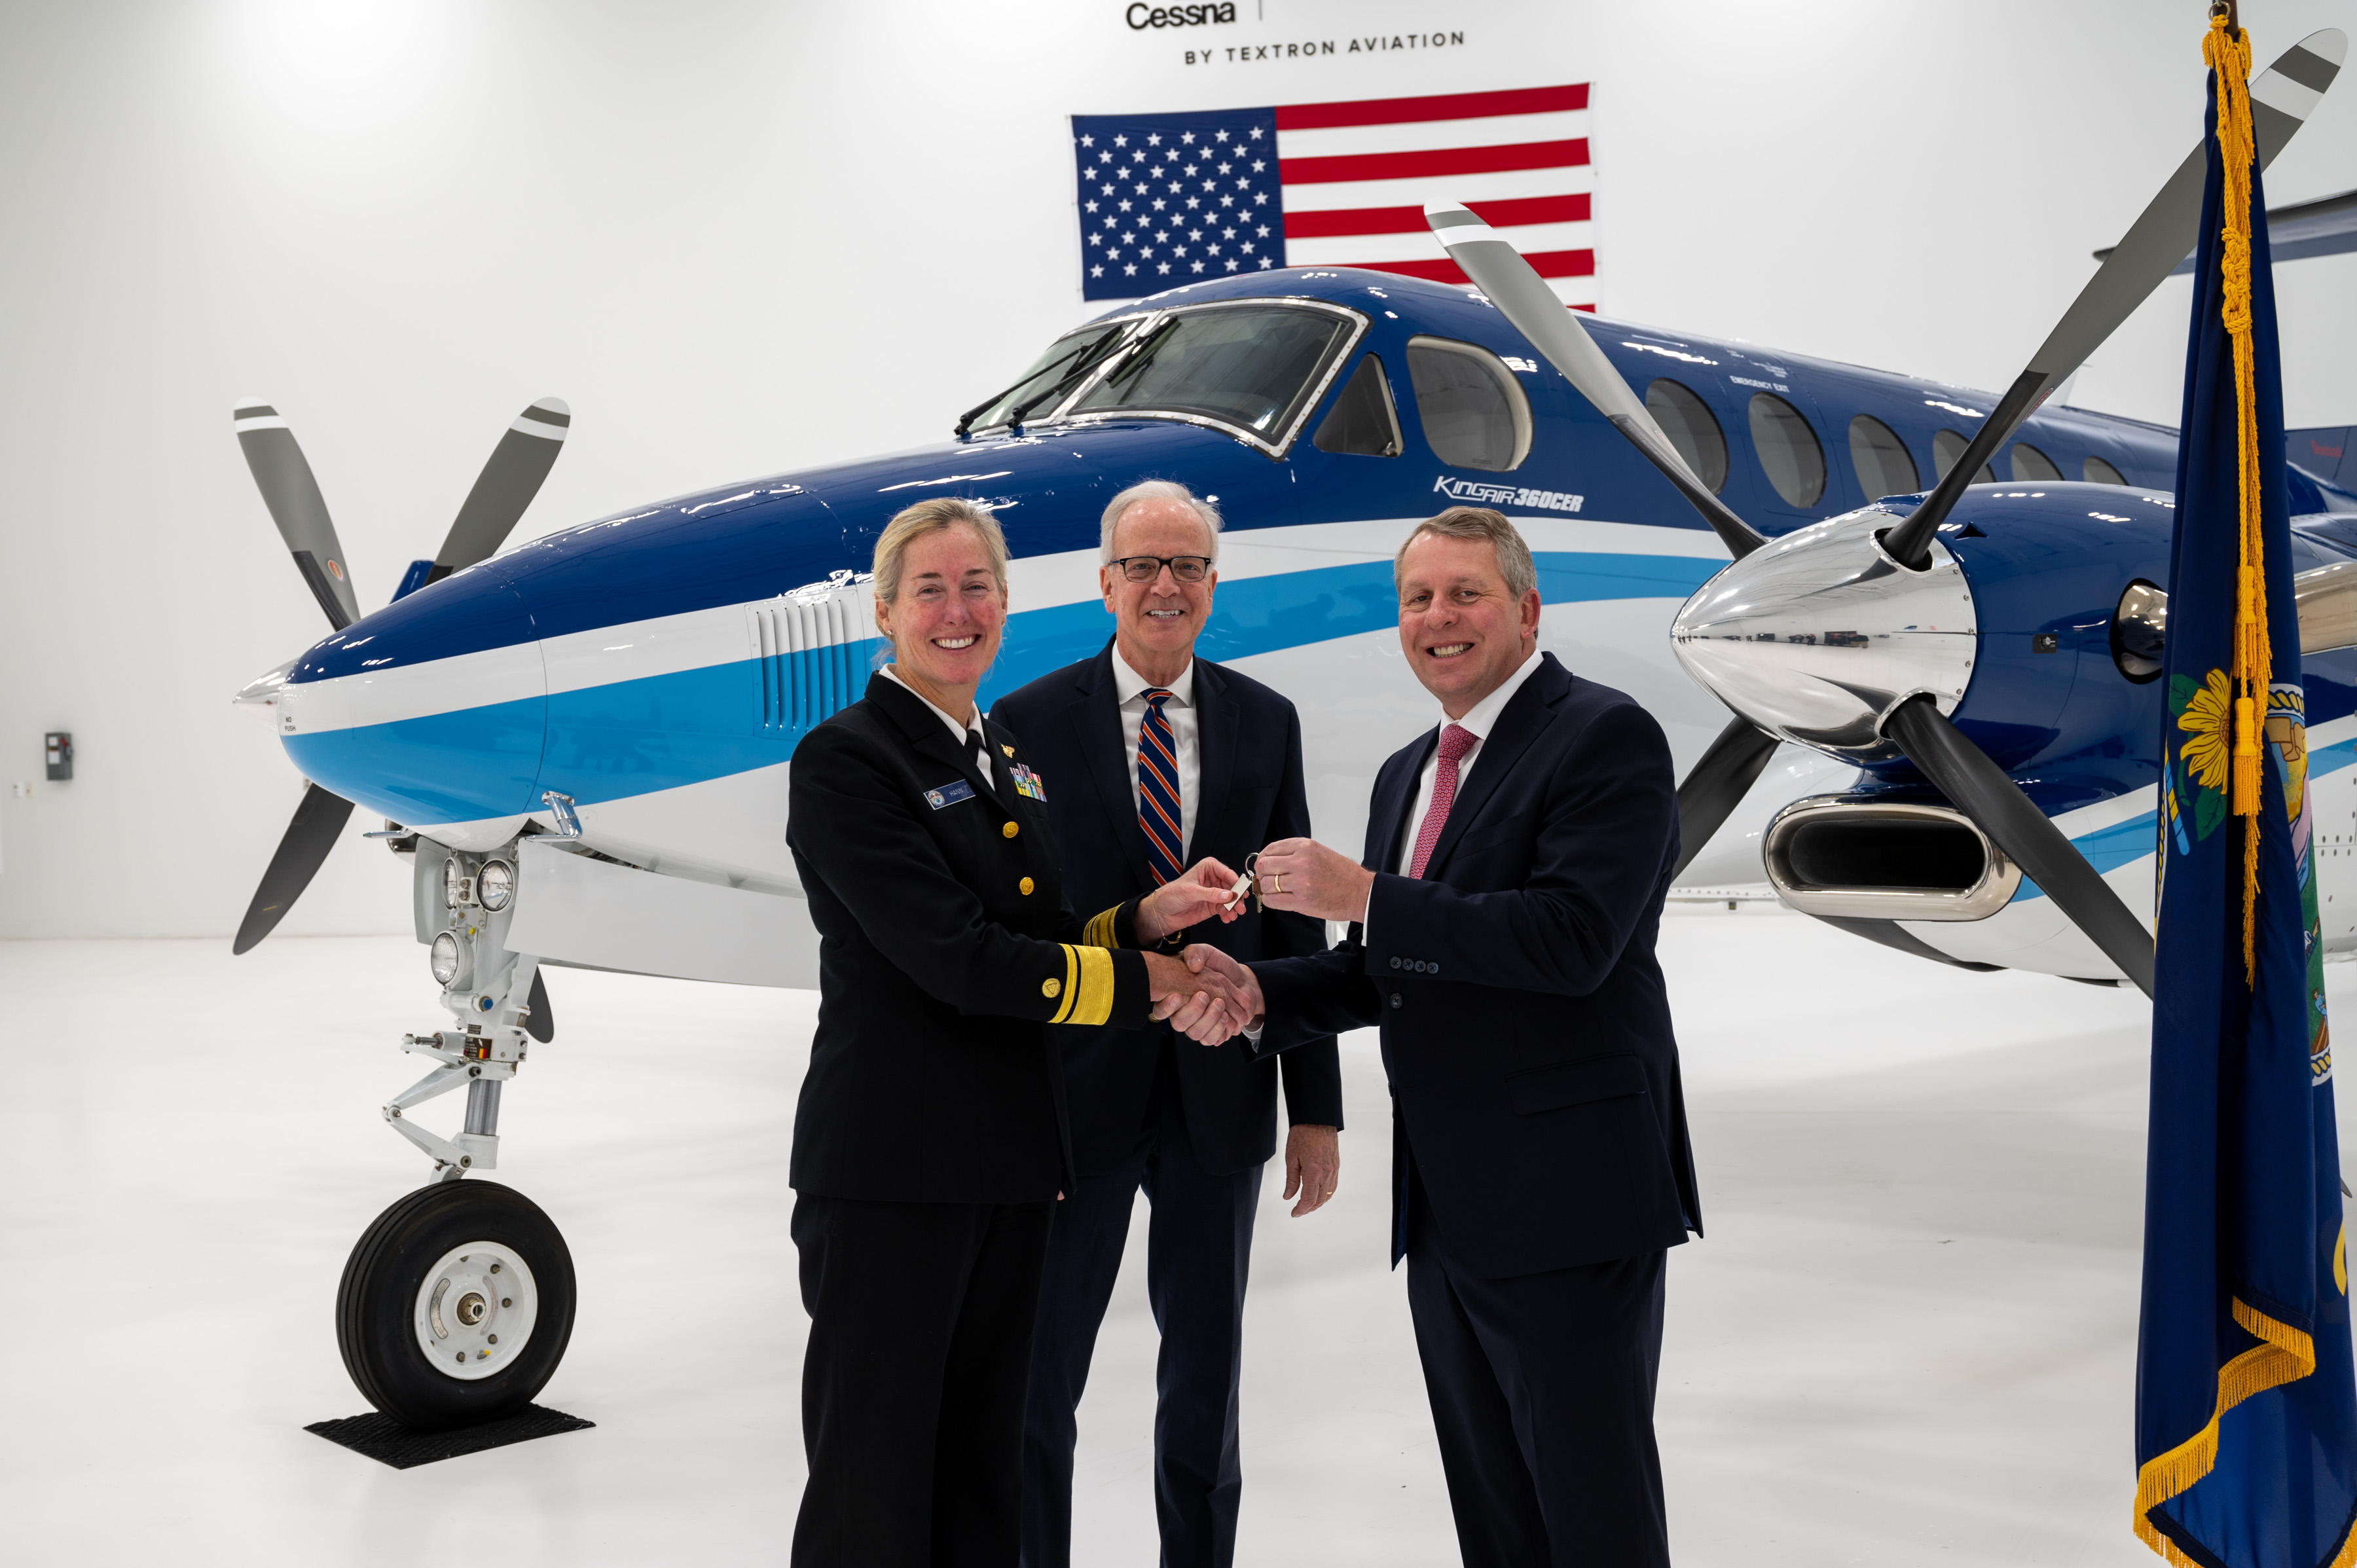 Image2 PHOTO RADM Hann conducts key exchange with Textron and Sen Jerry Moran 2023 Textron